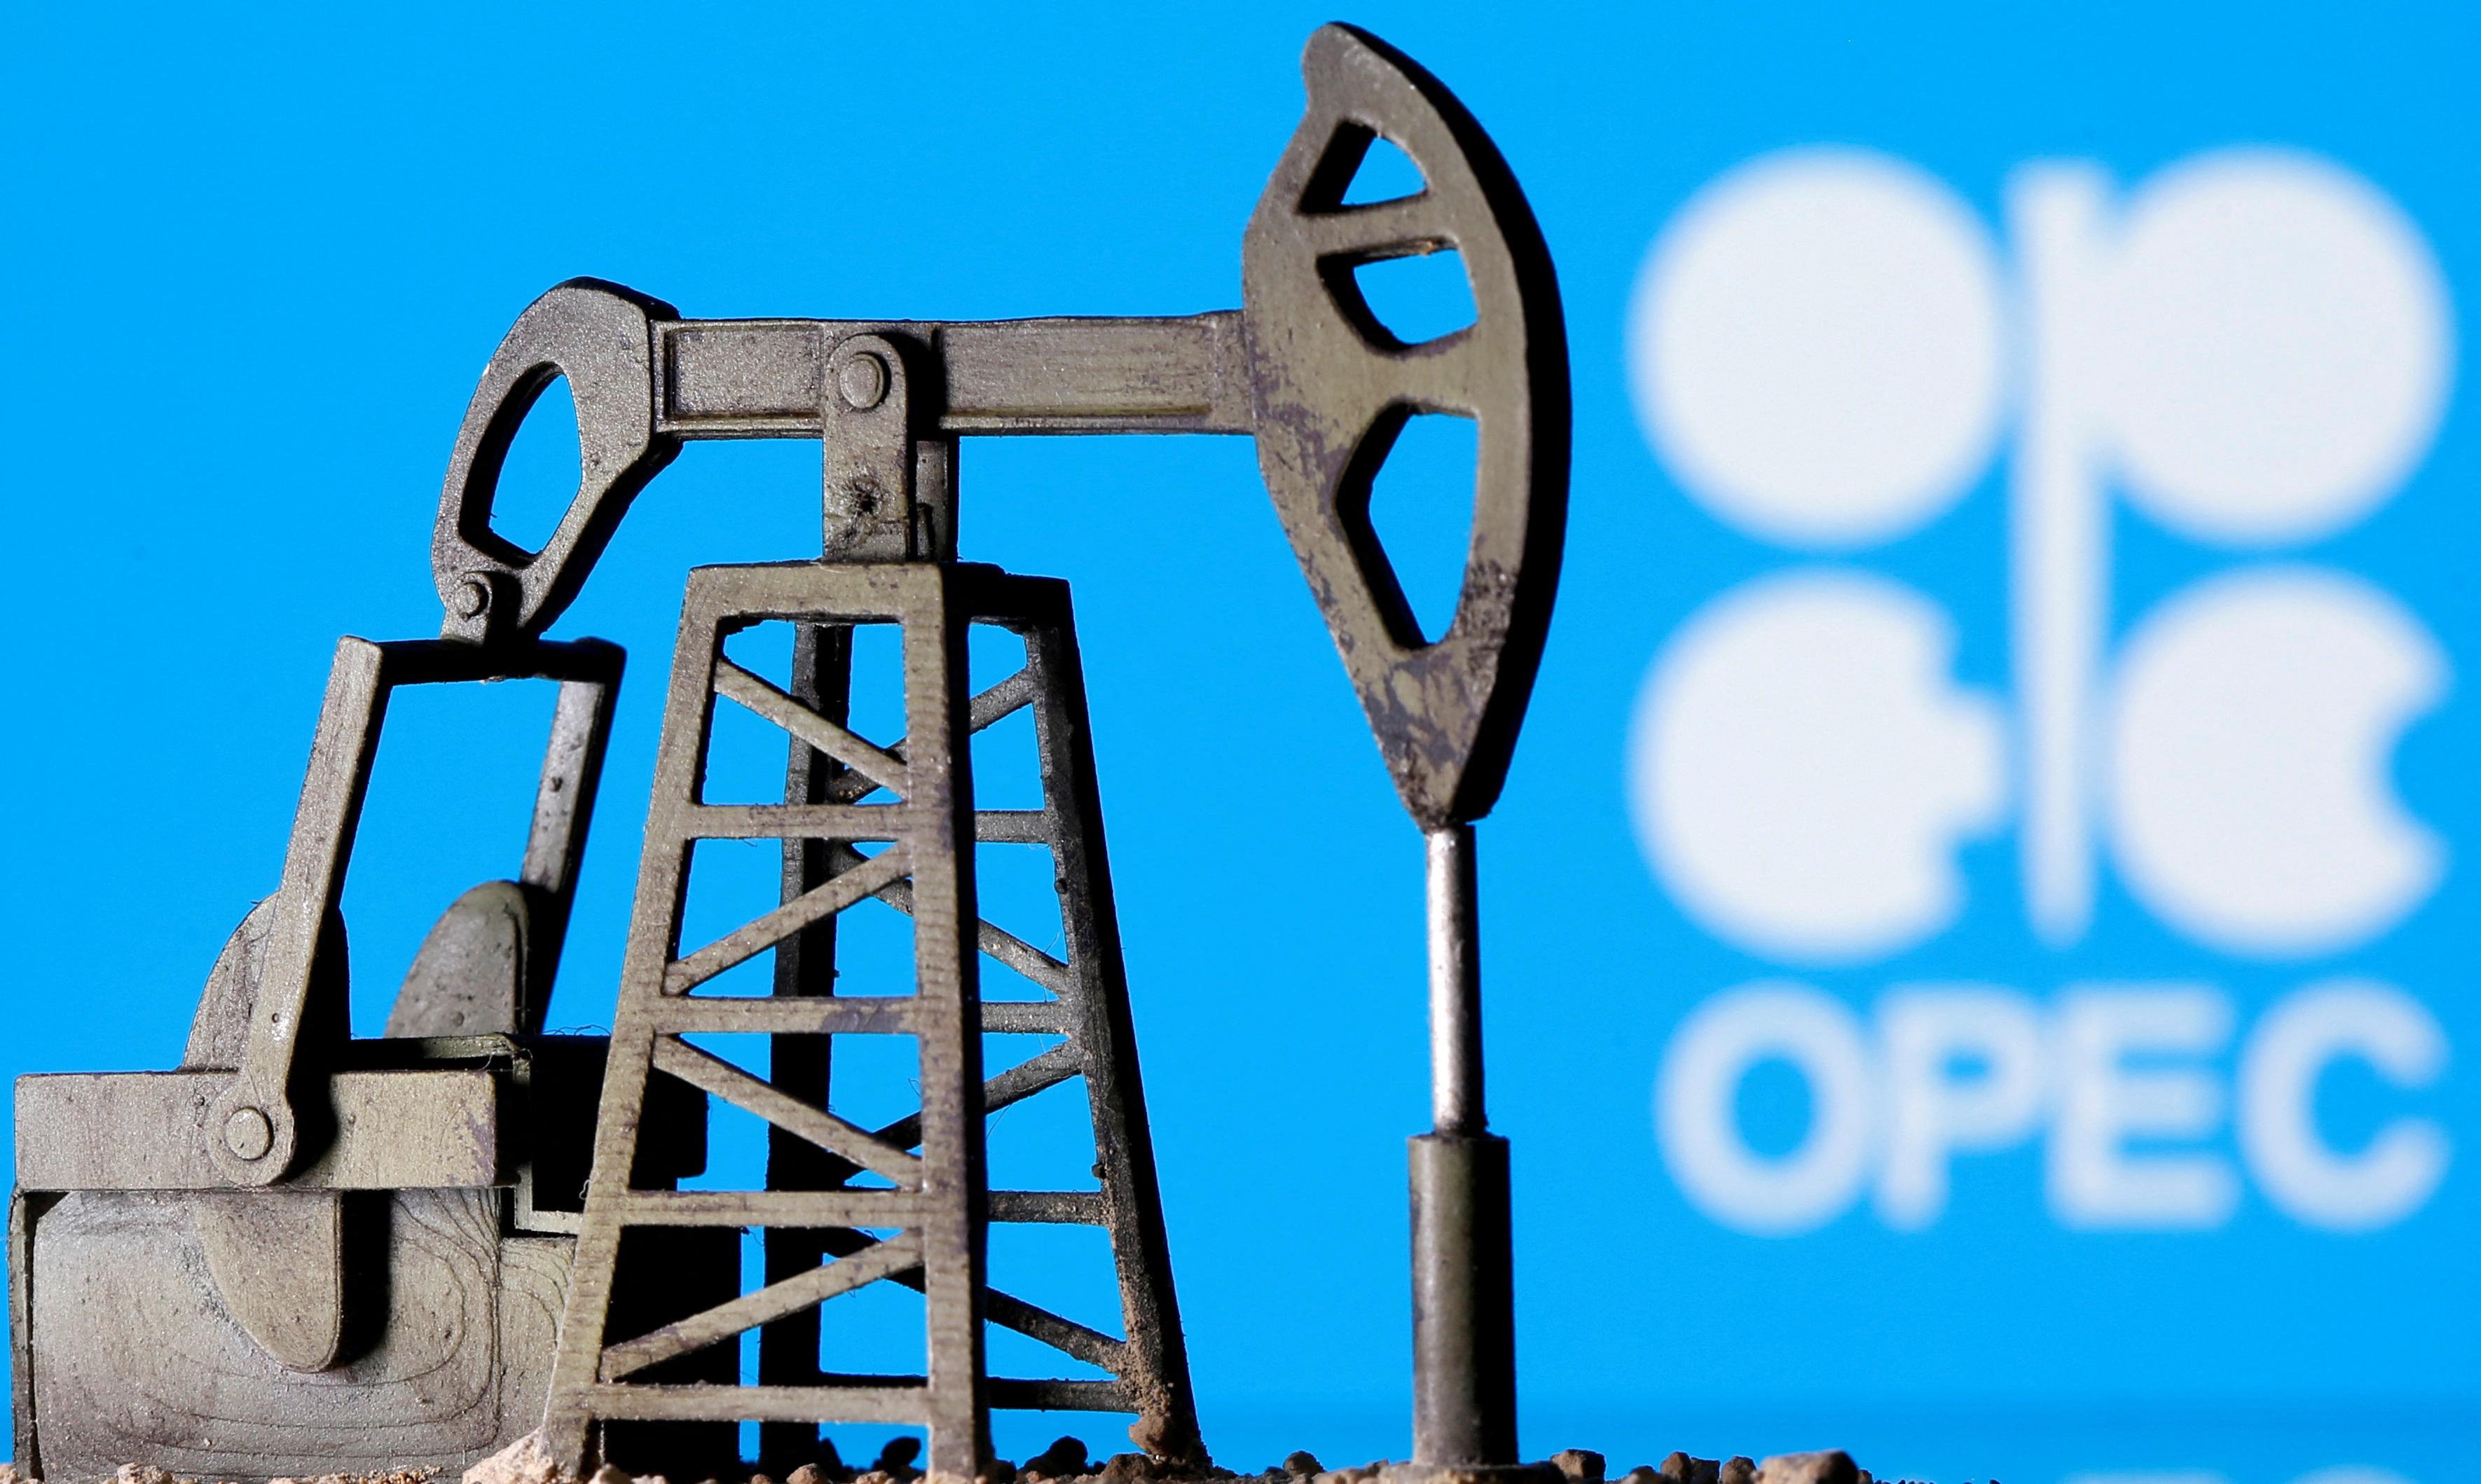 A 3D printed oil pump jack in front of the OPEC logo in this illustrative image